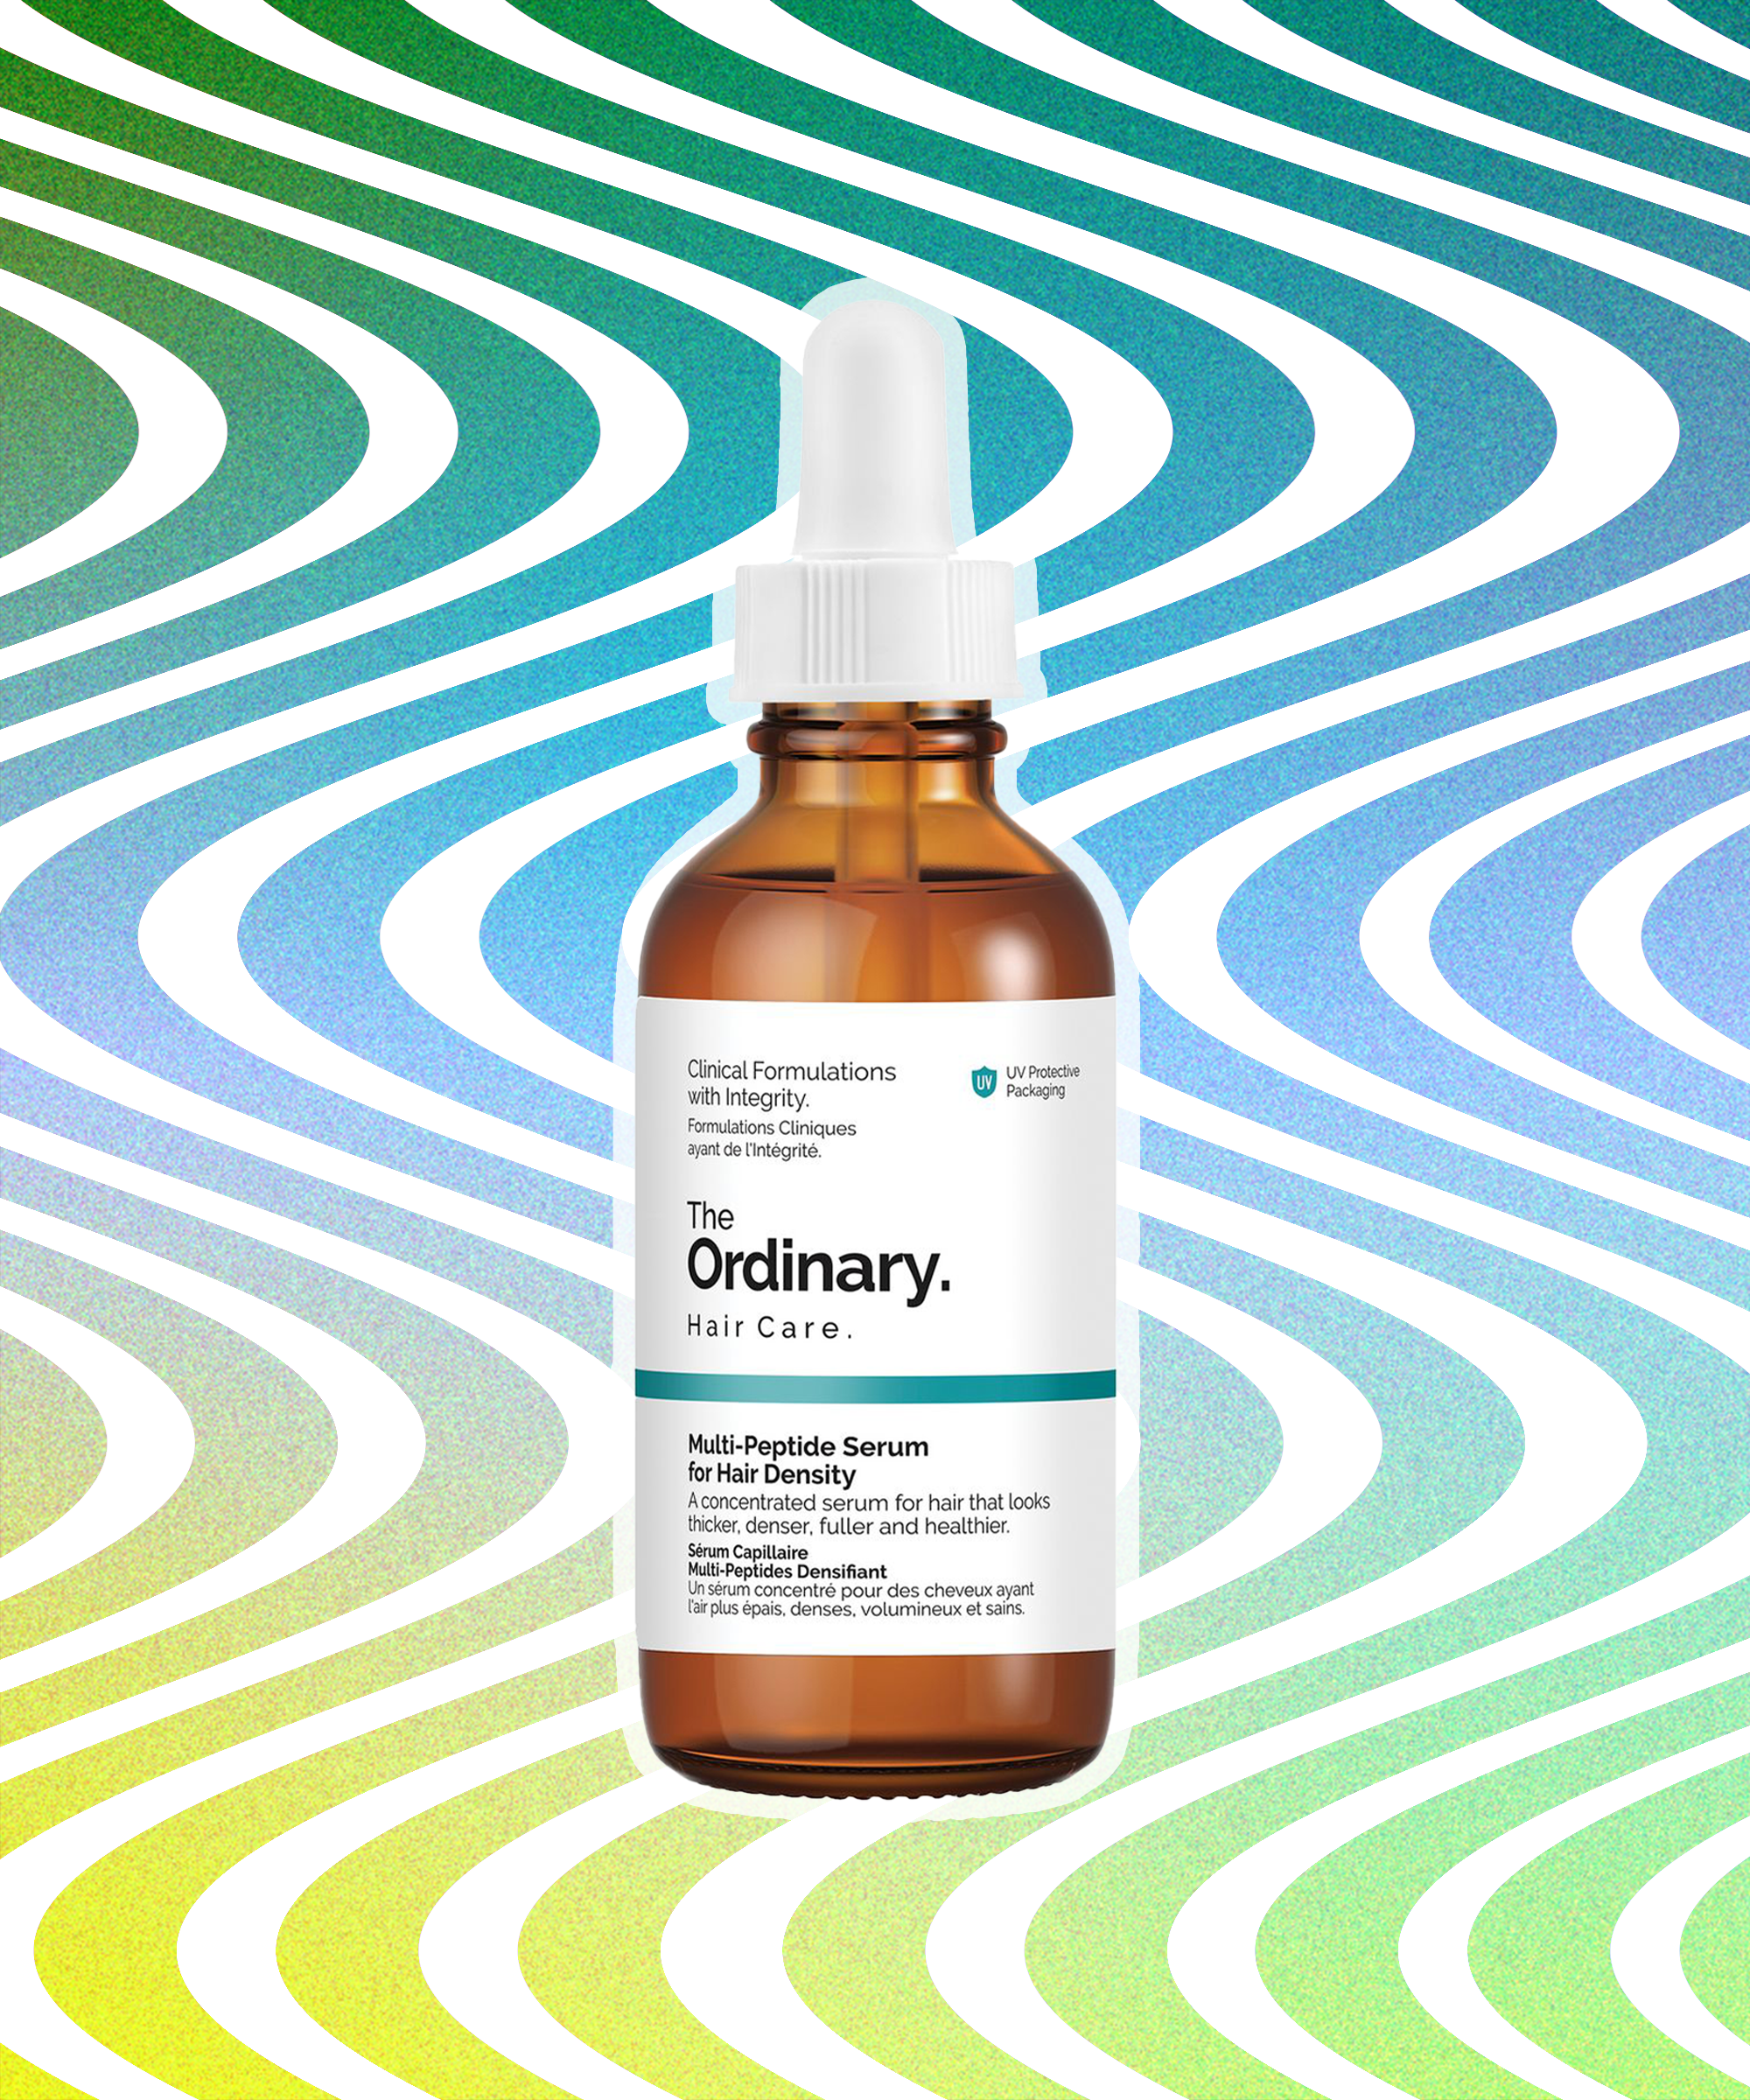 Multi-Peptide Serum For Hair Density The Ordinary Sephora | Chomel Ginger Hair  Growth Serum Spray Anti Hair Loss Natural Beauty Hair Care Fast Treatment  Prevent Hair Thinning Dry Frizz 